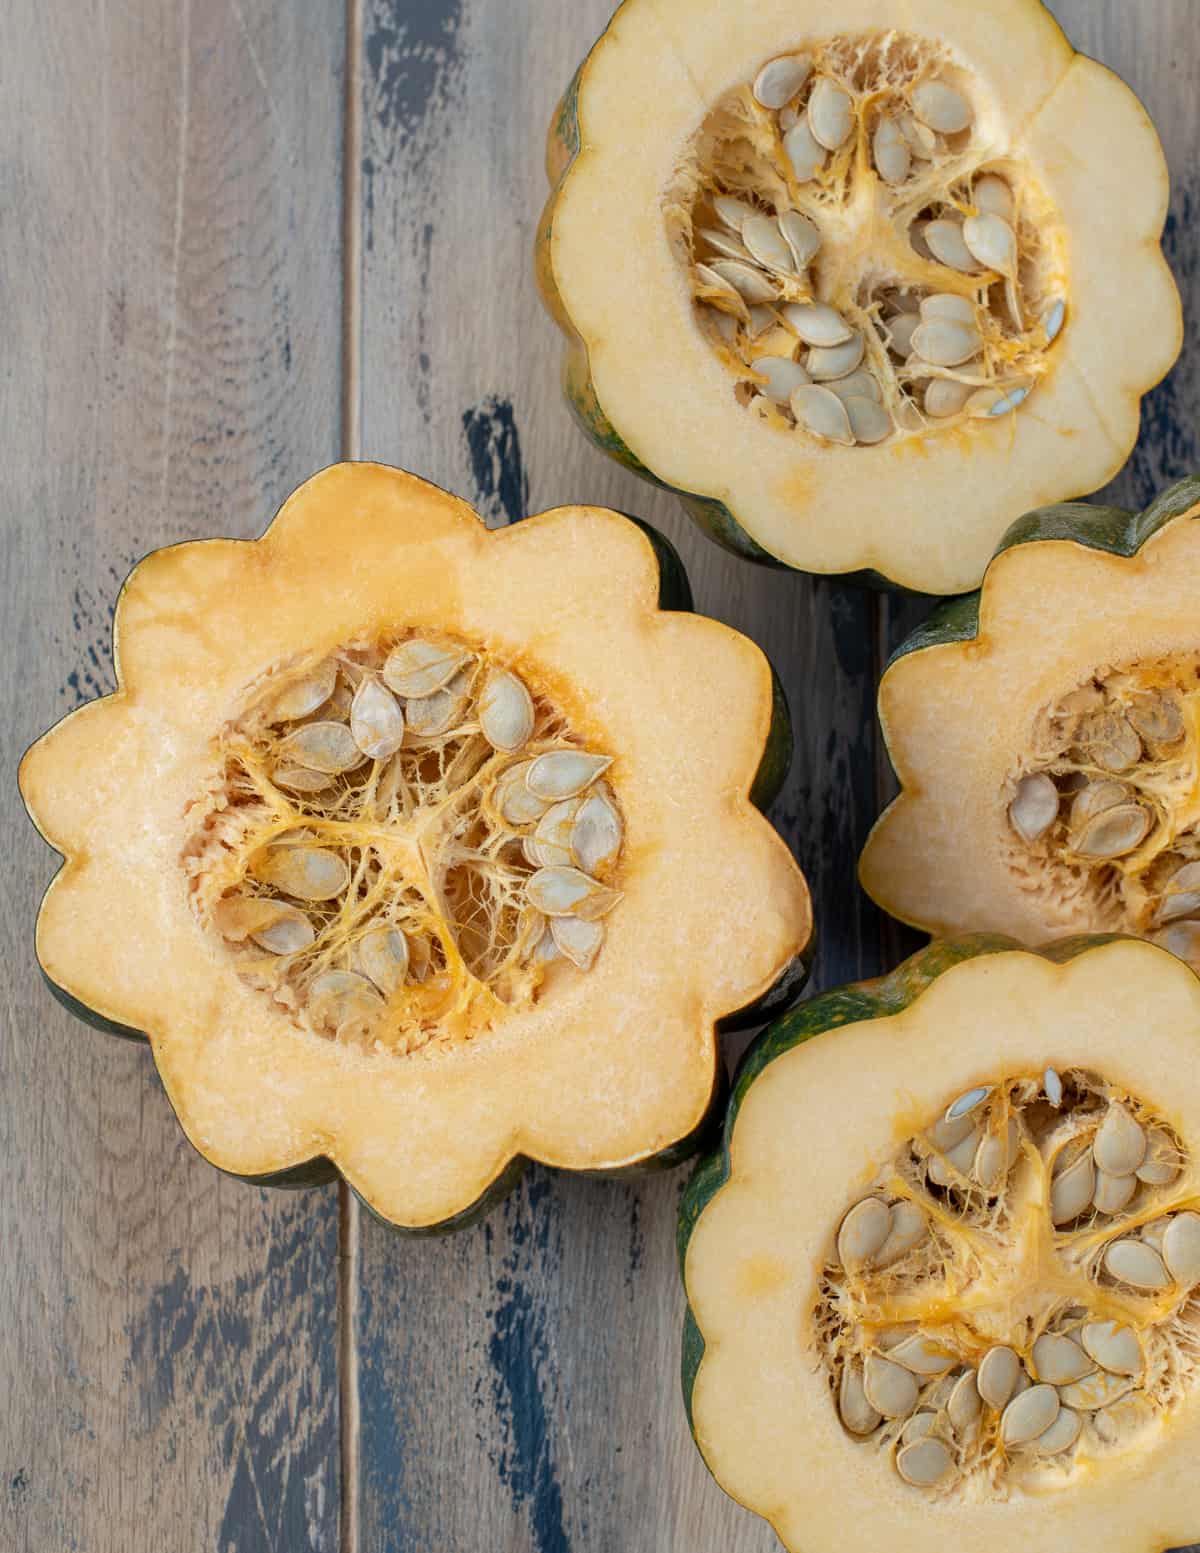 A top dpwm shot of acorn squash that have been sliced in half to reveal the seeds inside.